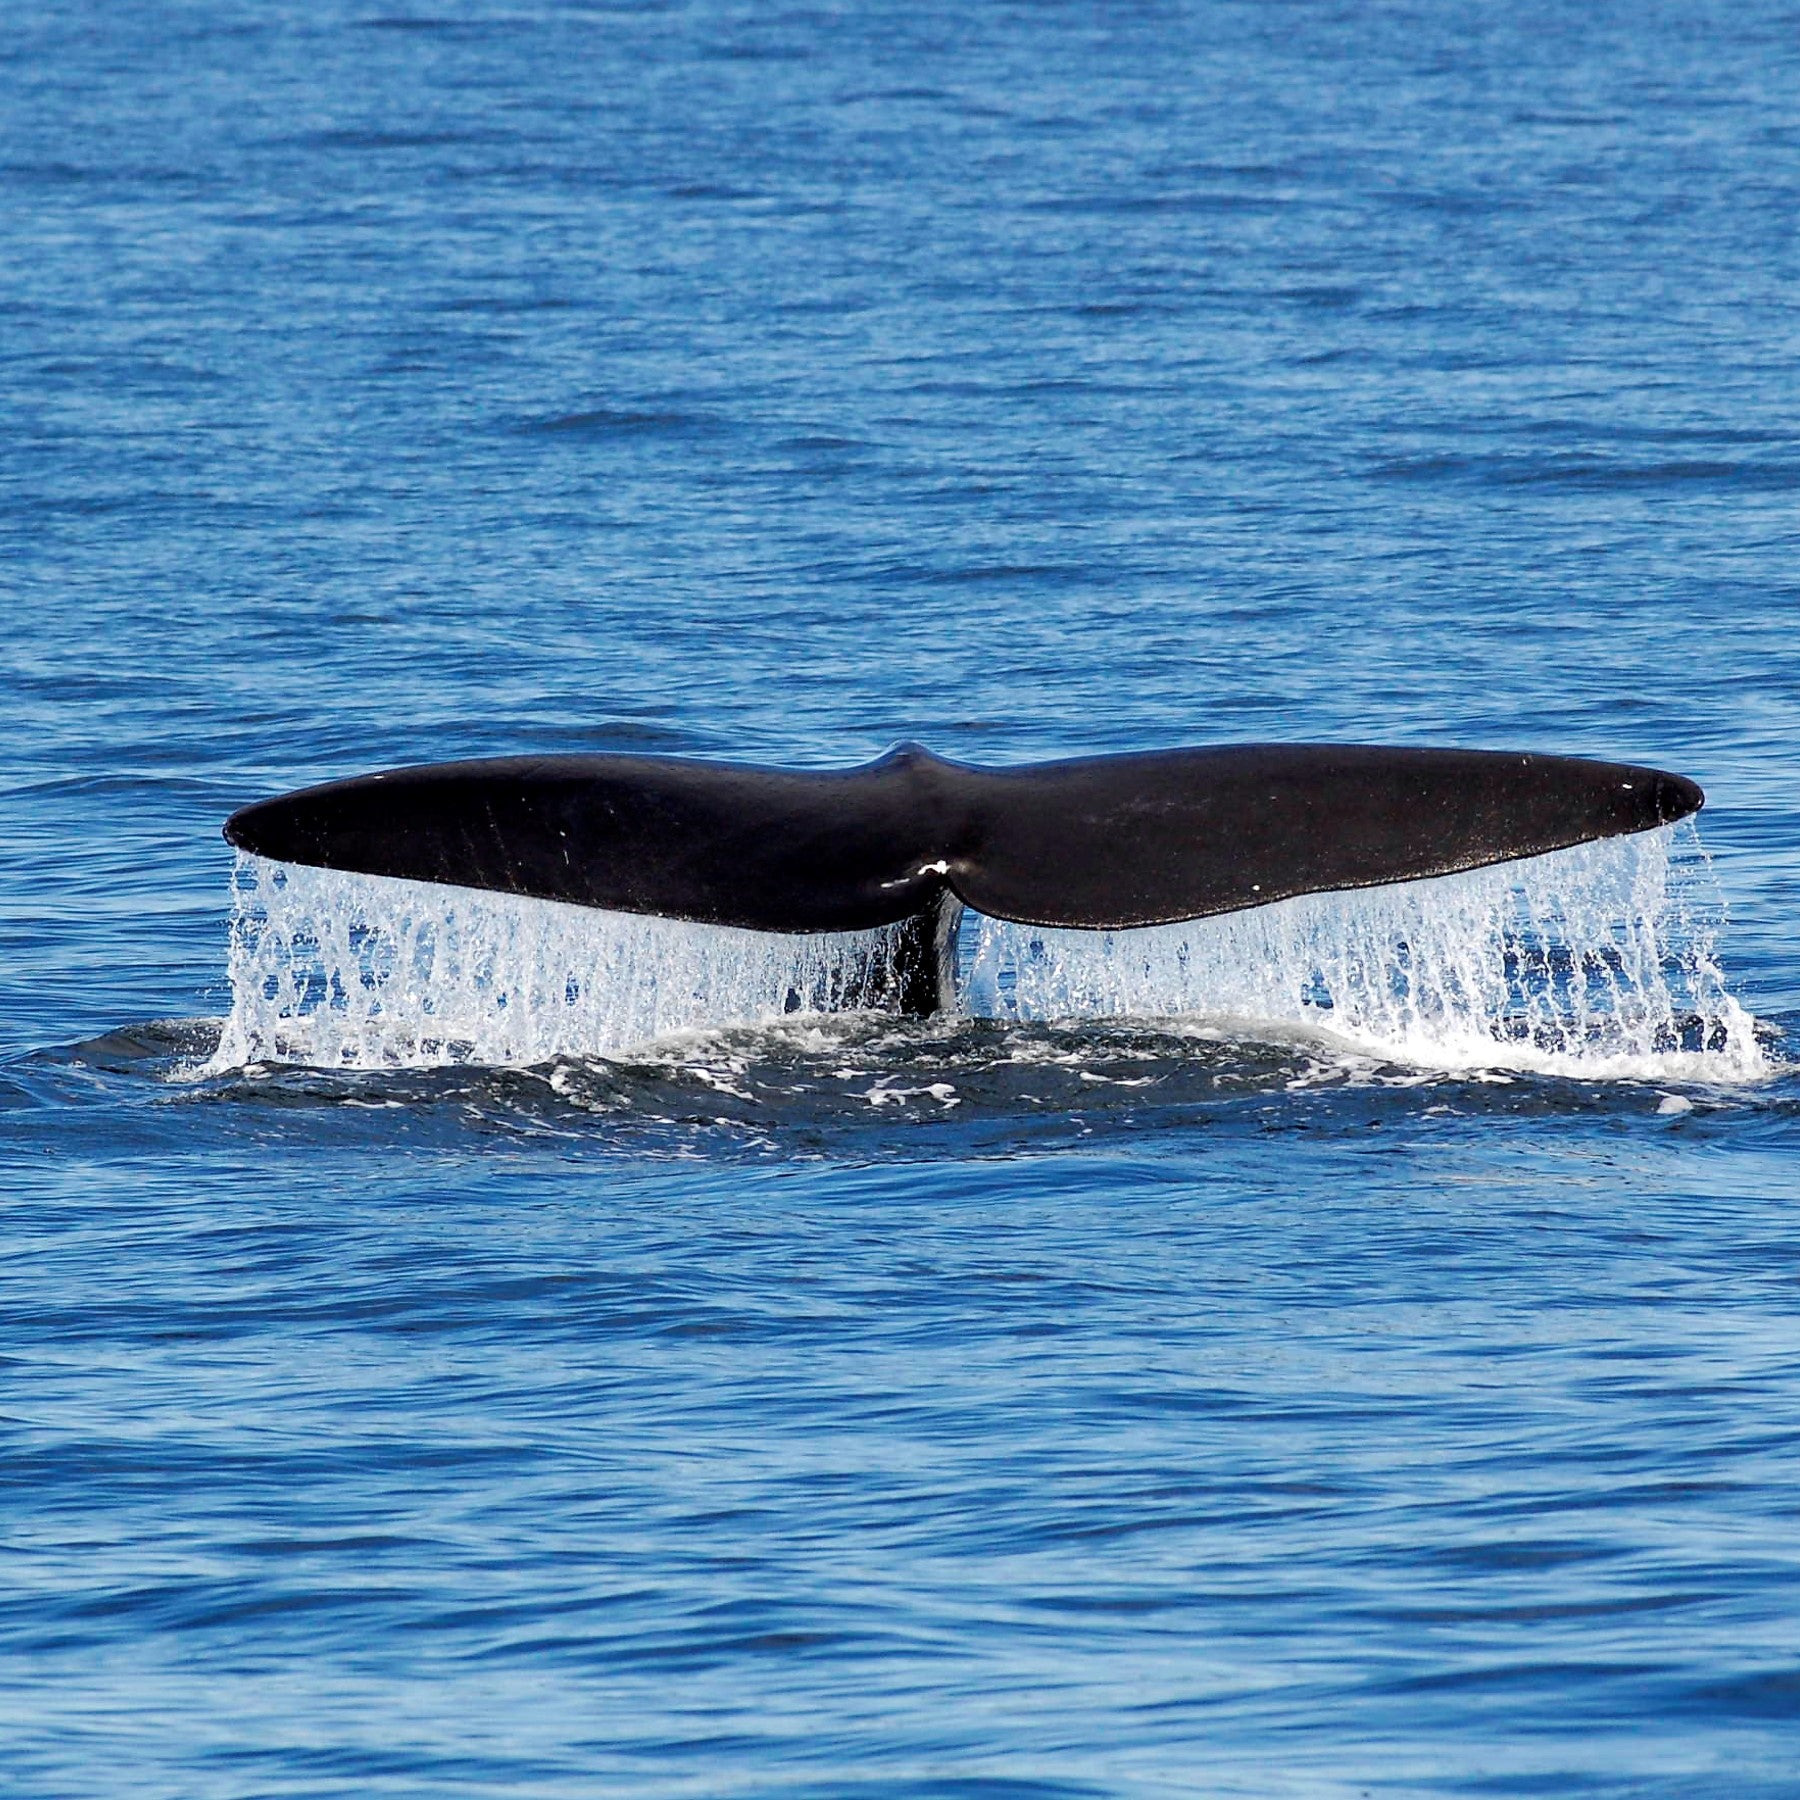 The tail of a Northern right whale appearing above water